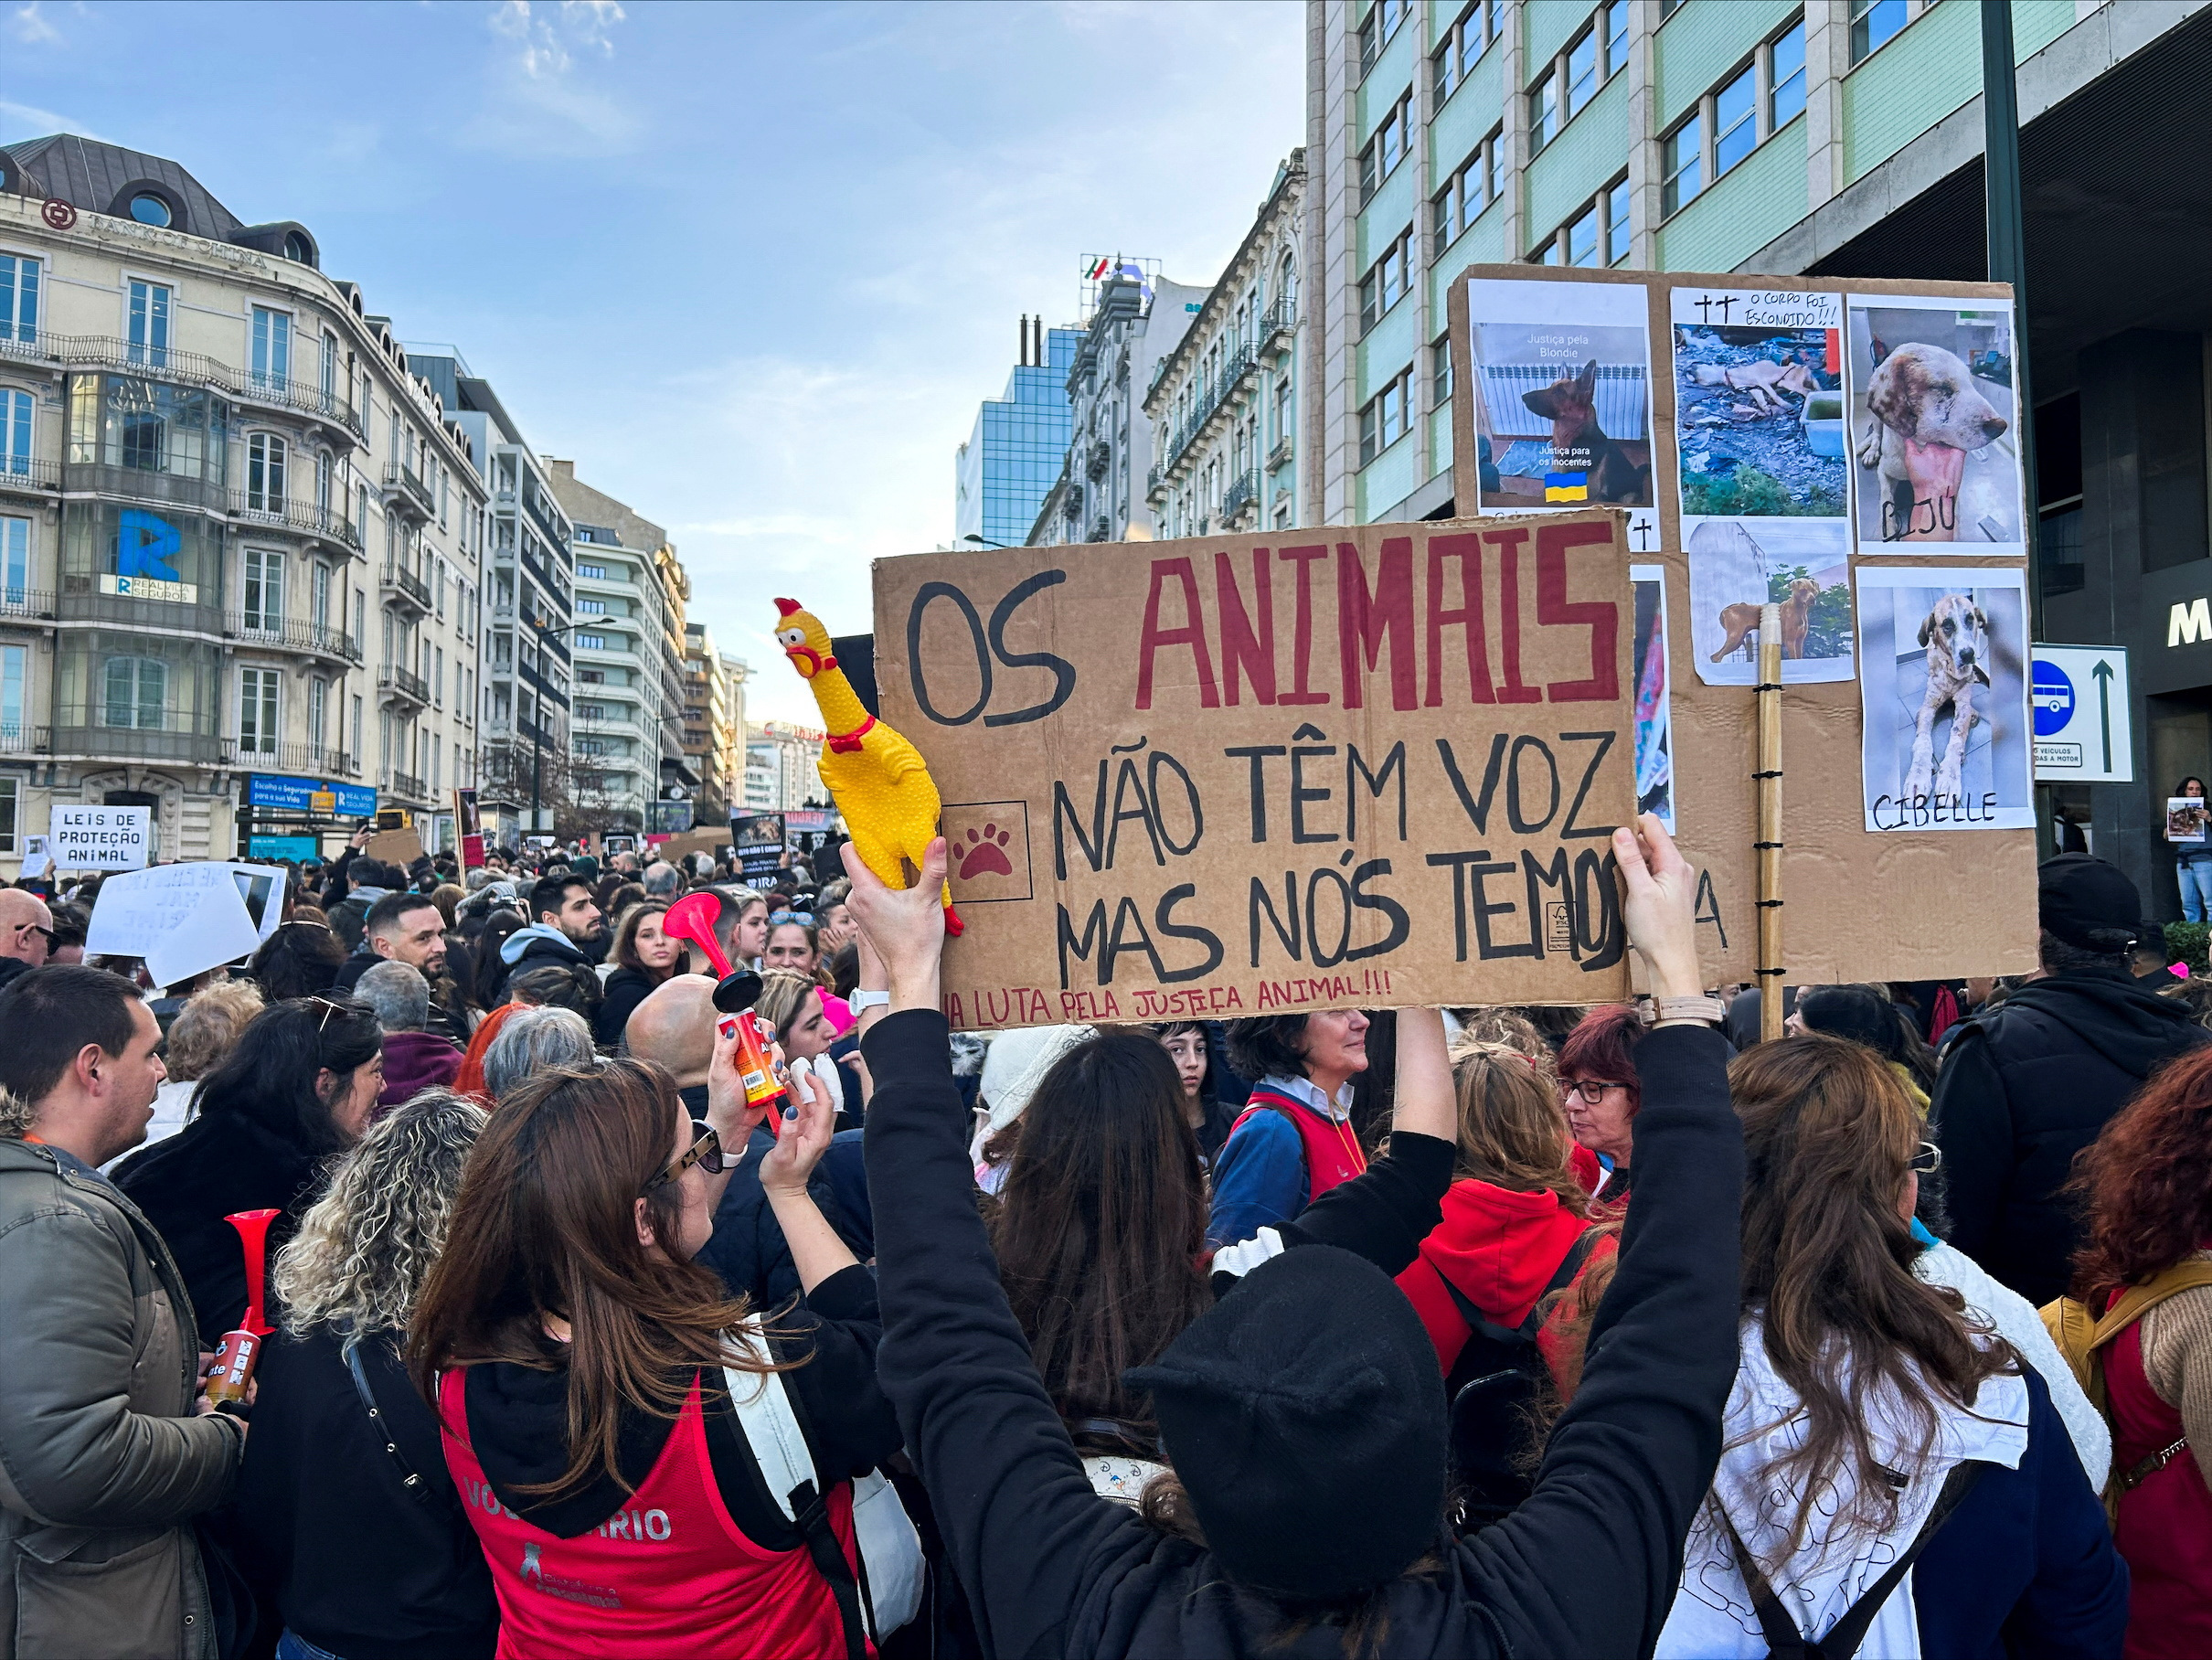 Thousands protest in Lisbon for animal rights amid constitutional dispute |  Reuters